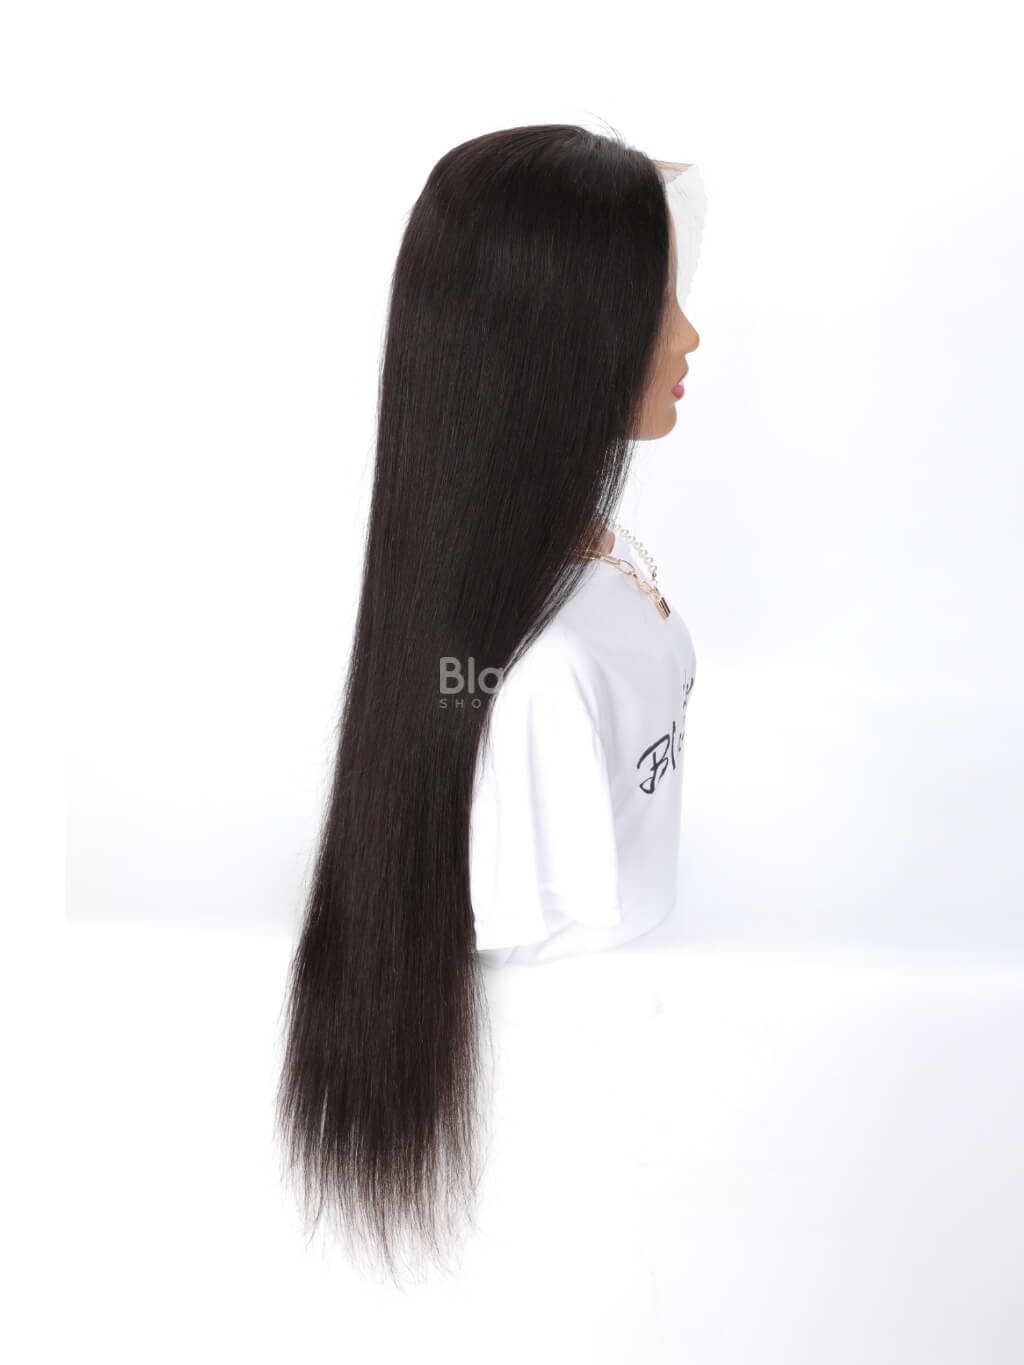 Lace Front Wigs Human Hair Straight Human Hair 13x4 Lace Frontal